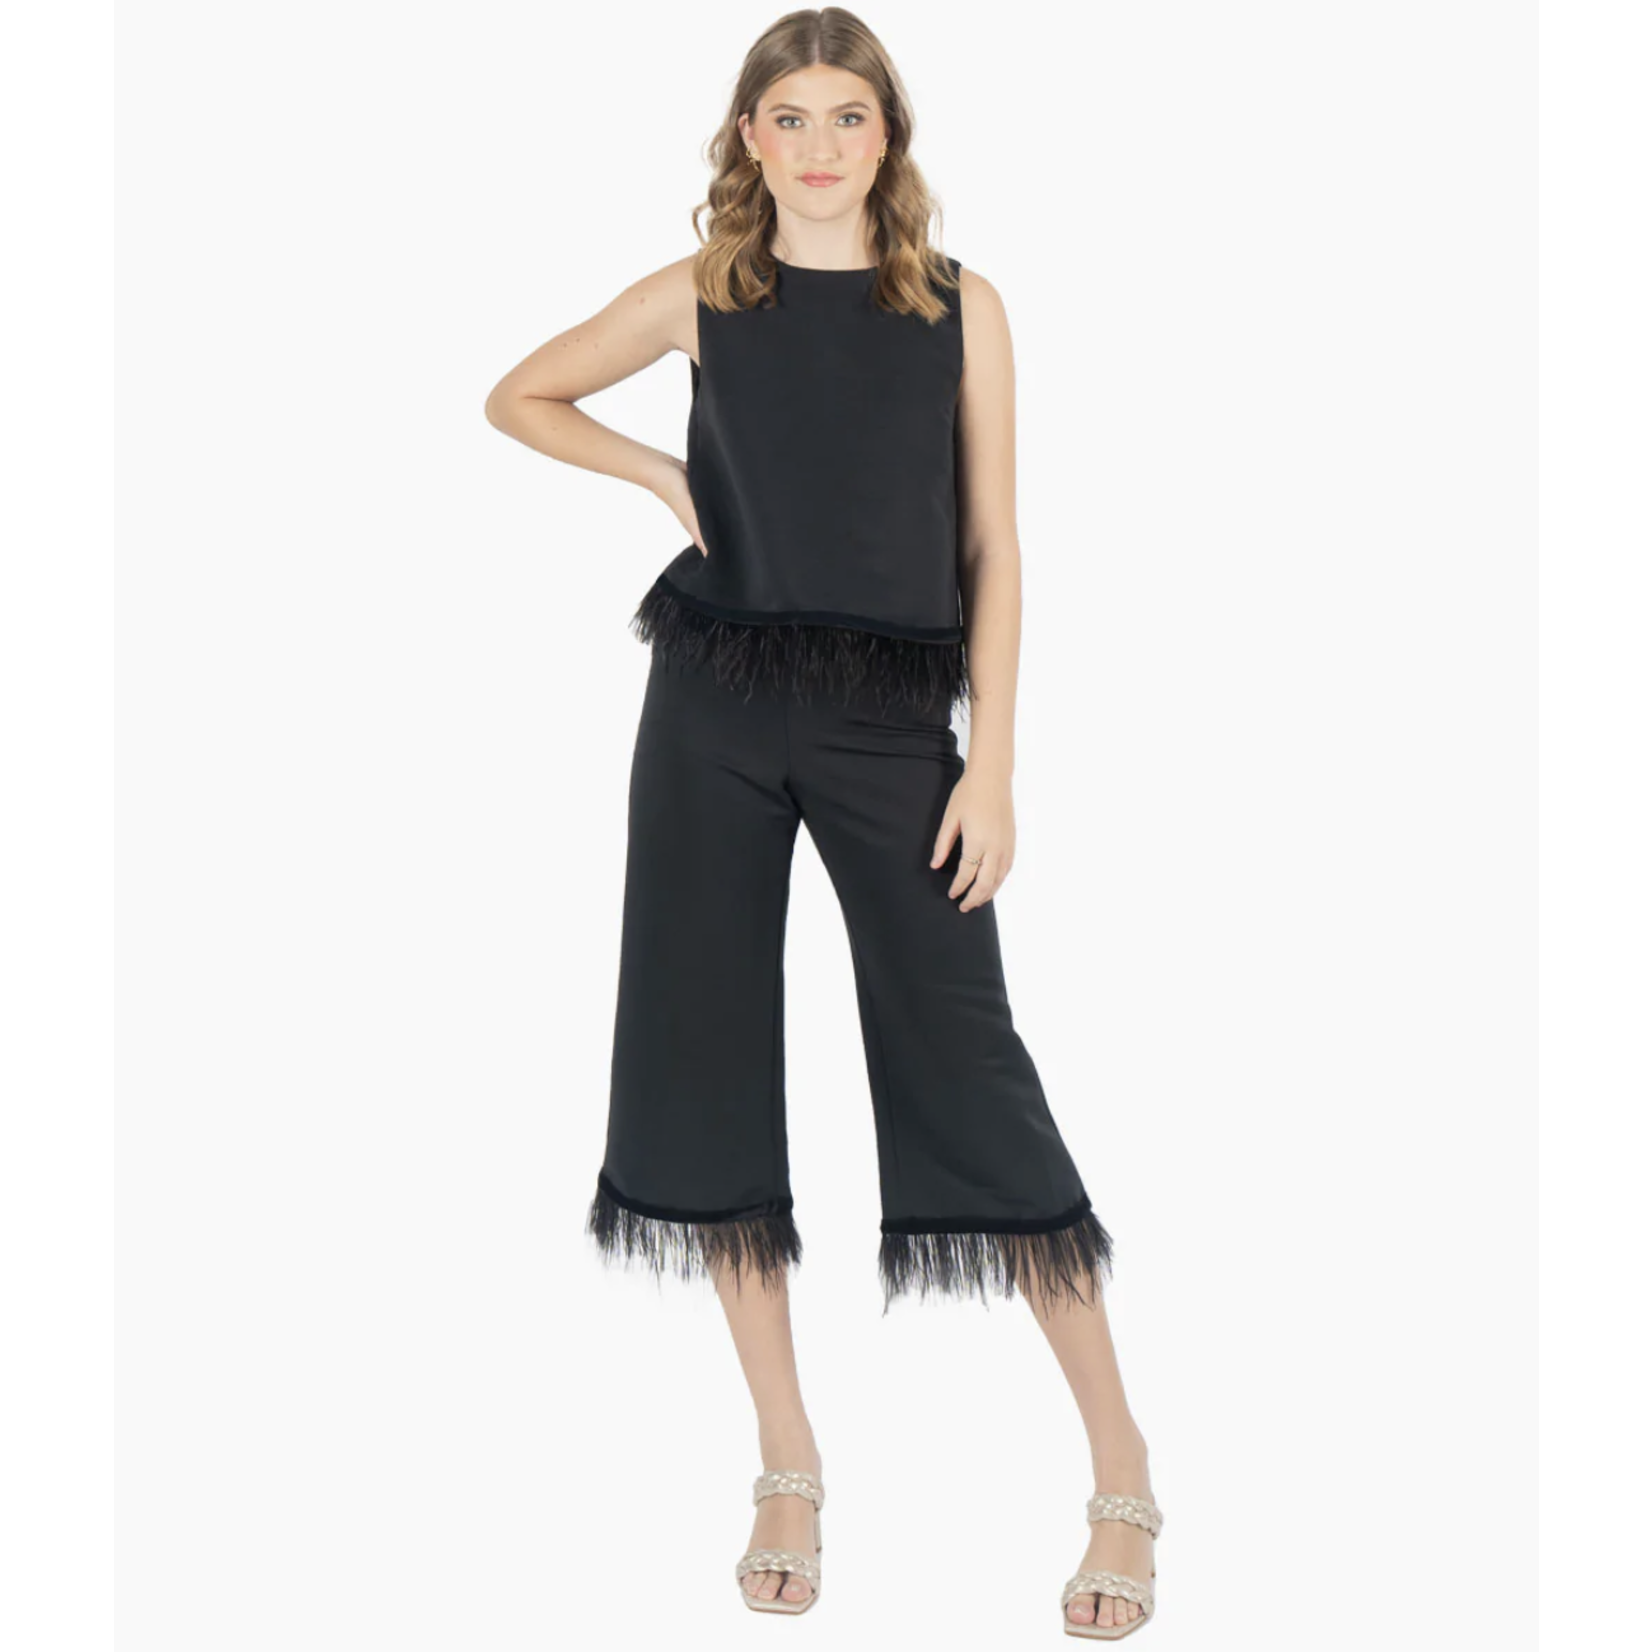 Emily McCarthy Palazzo Party Pant